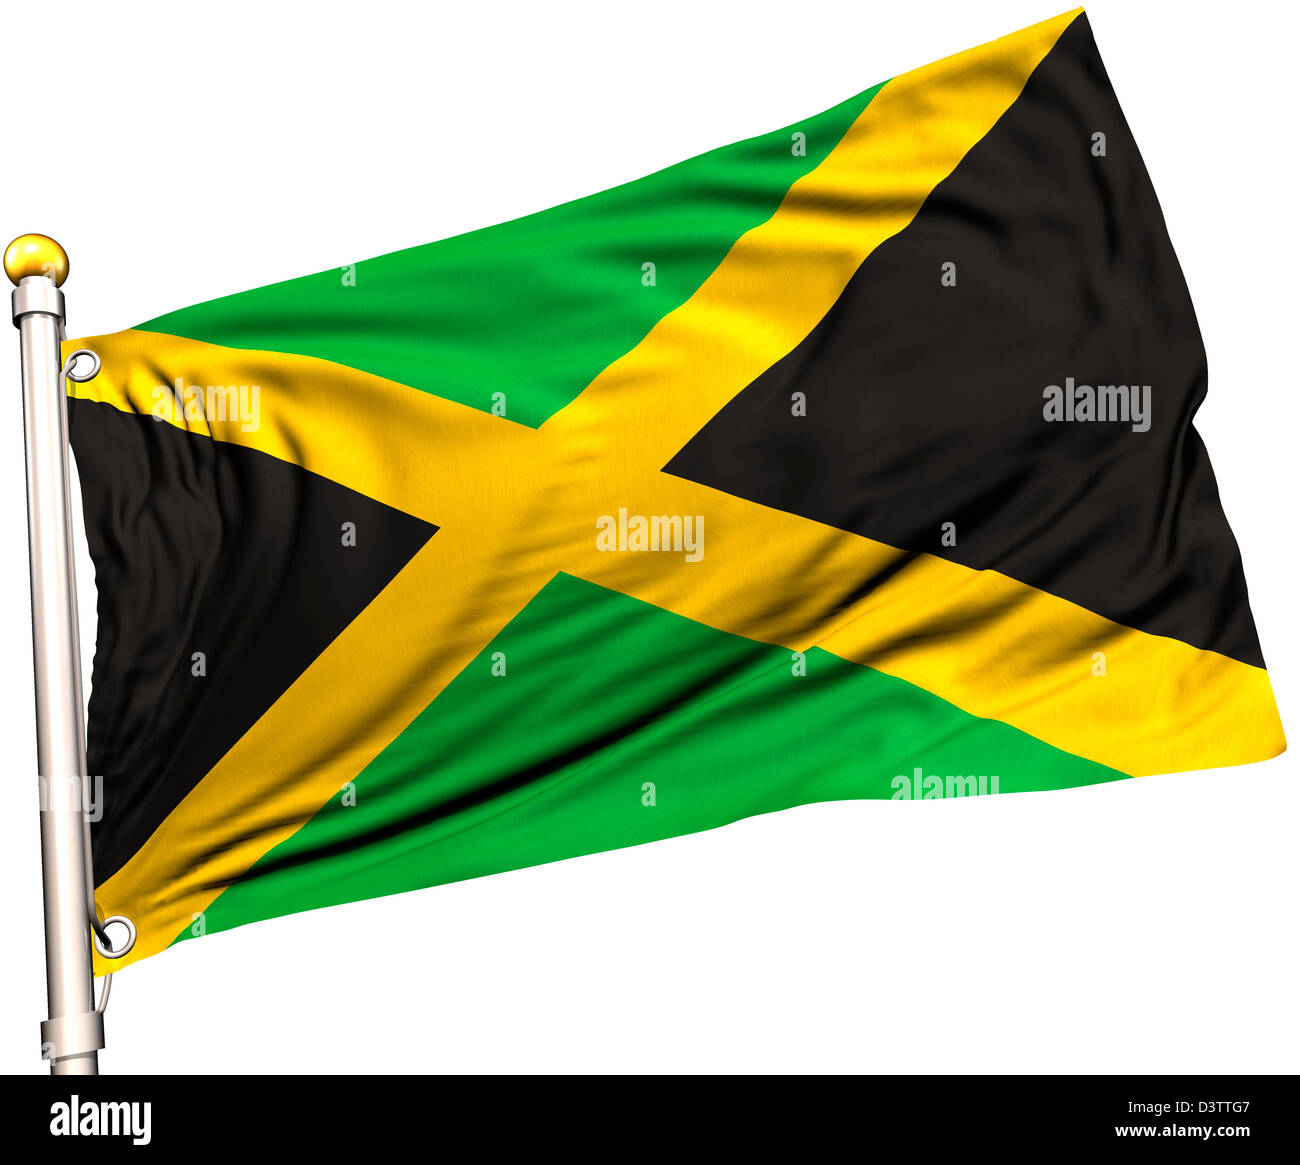 Jamaica flag on a flag pole. Clipping path included. Silk texture visible on the flag at 100%. Stock Photo